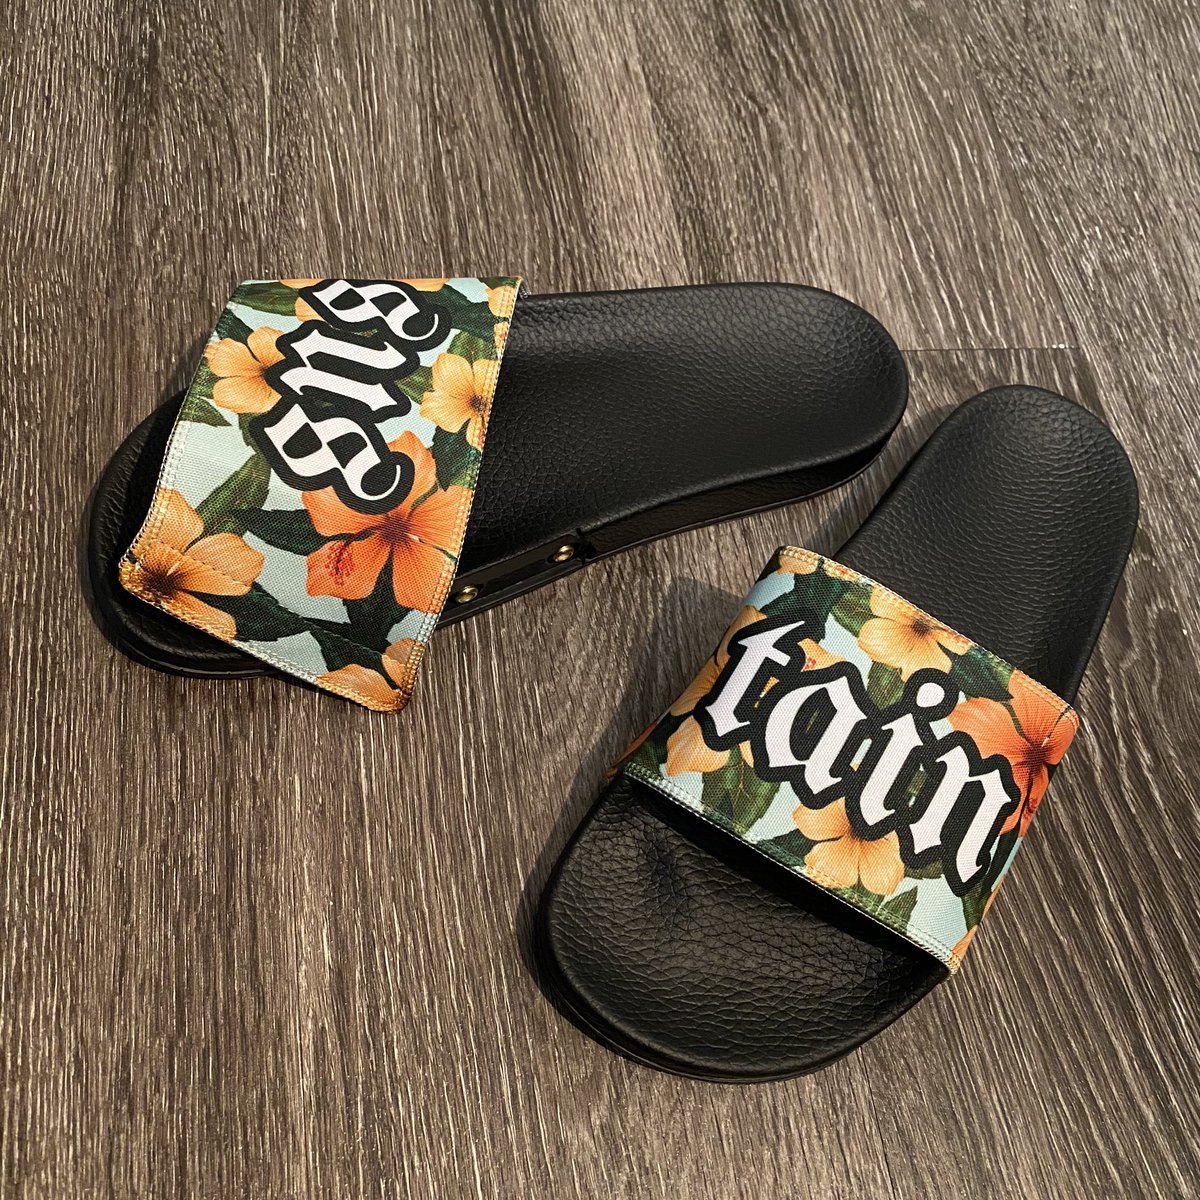 Our brand is build around versatility and durability! 

Our new slides straps are...
• Swappable
• Machine washable
• Water safe

✨All slides are available in the shop now!

#sustainsis #slides #slidesandals #shopsmall #explorepage